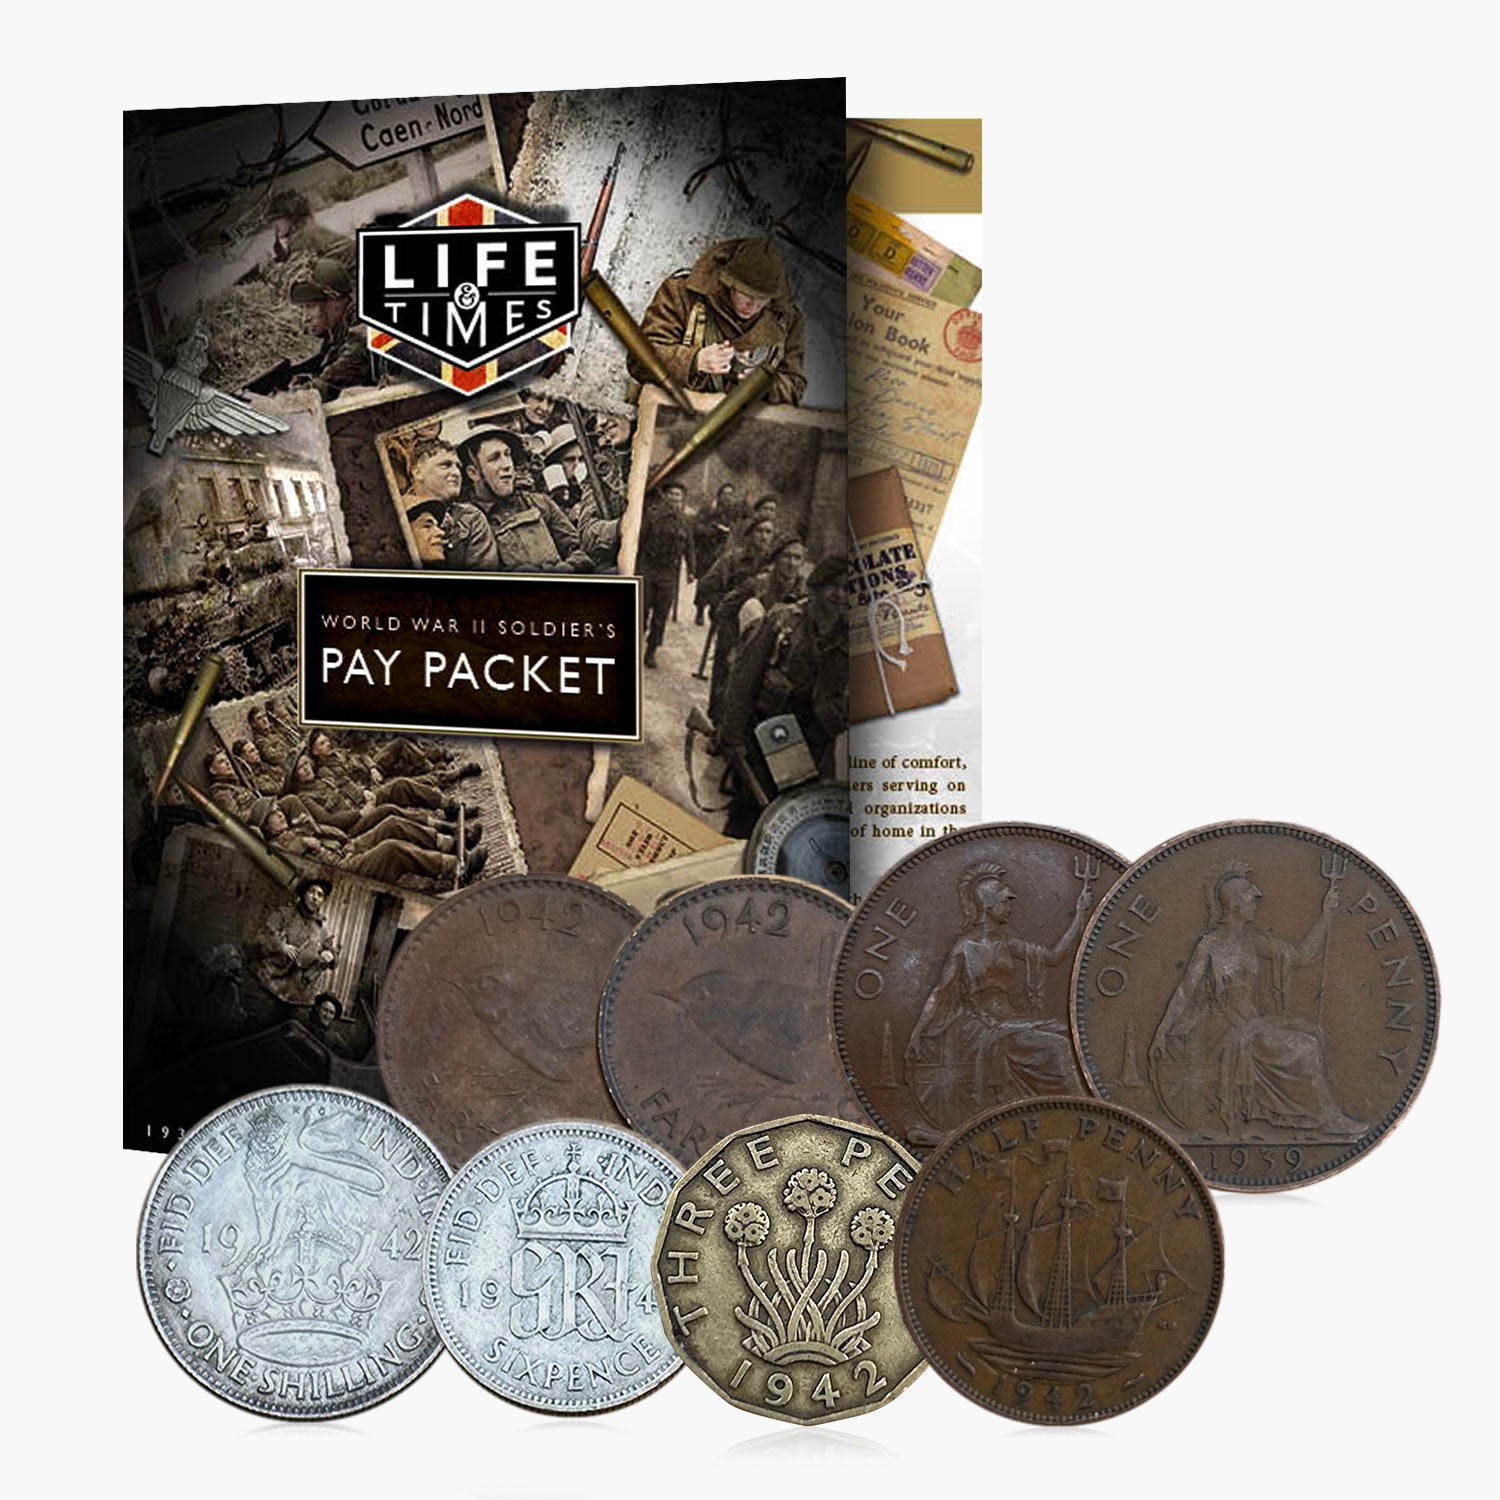 Life & Times - WWII Soldiers Pay Packet 1942 Coin Set